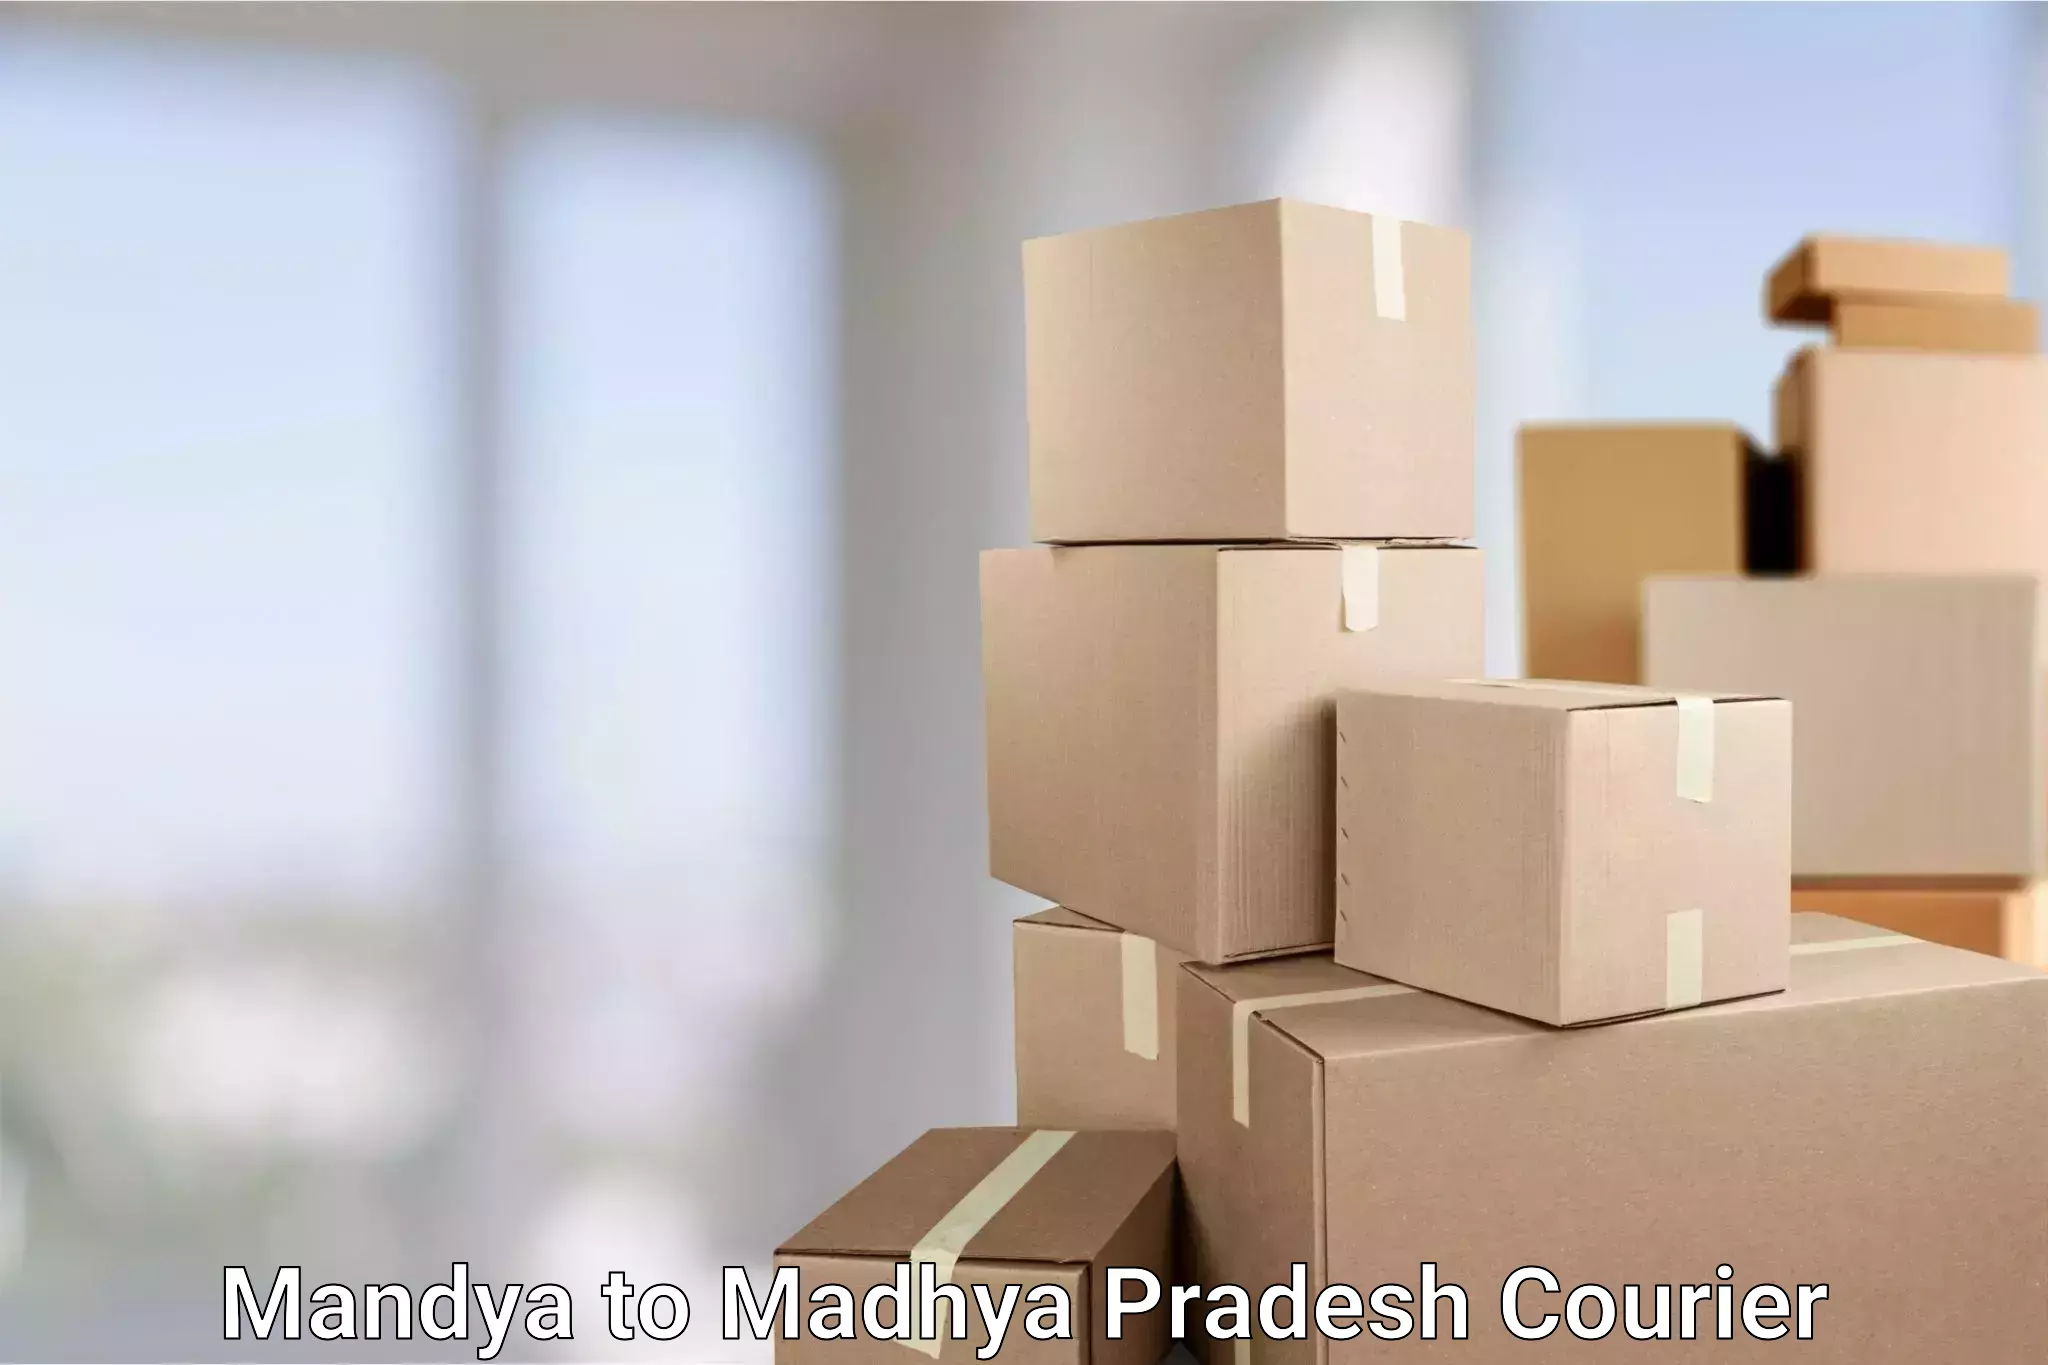 Tailored delivery services Mandya to BHEL Bhopal